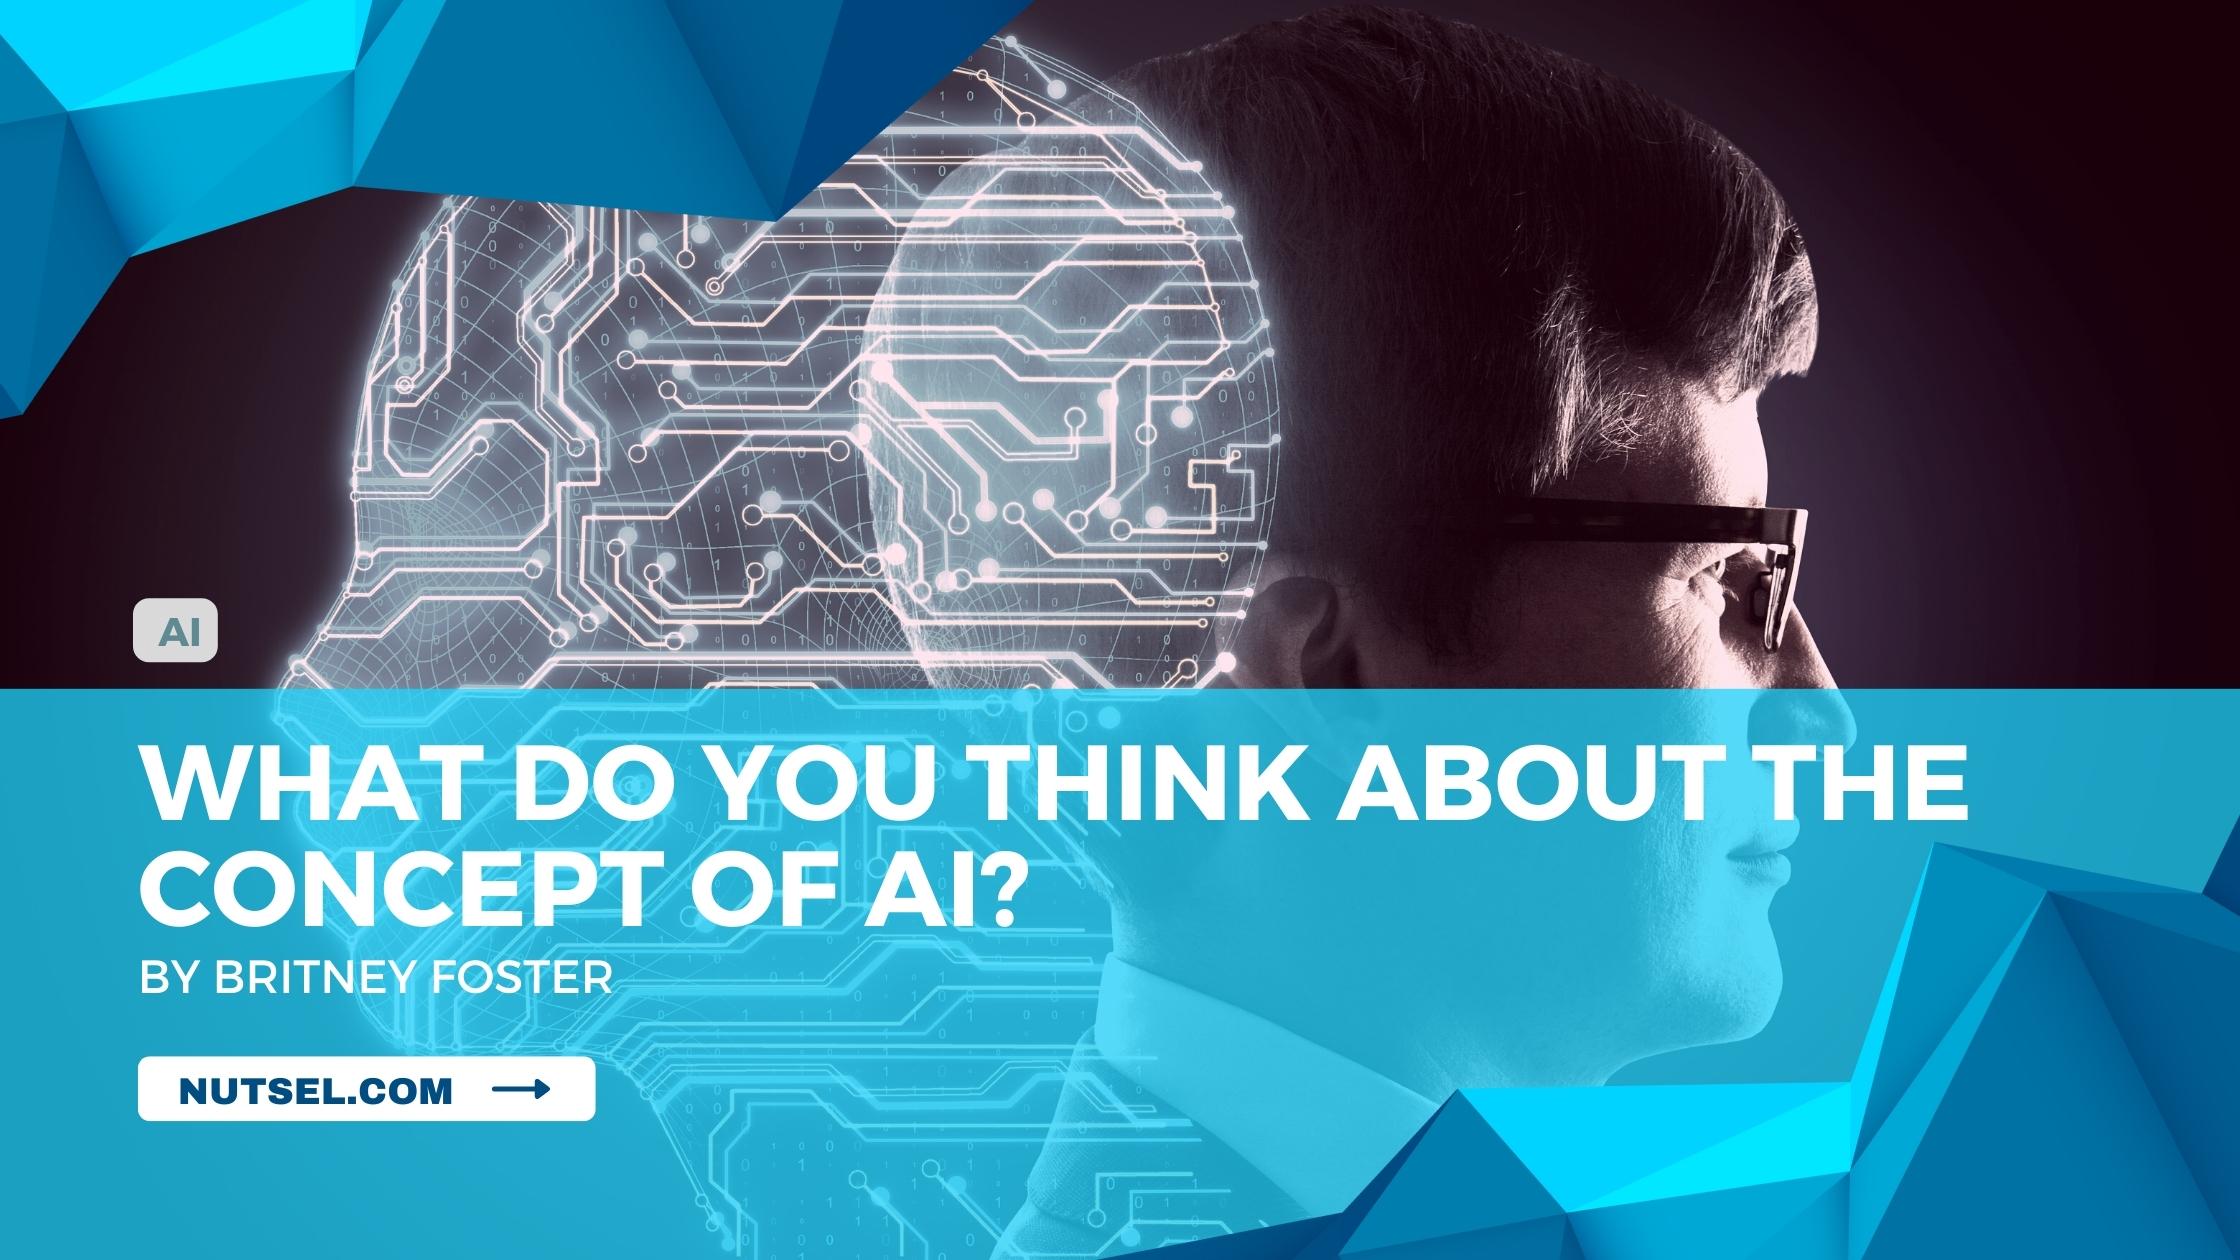 What do you think about the concept of AI?